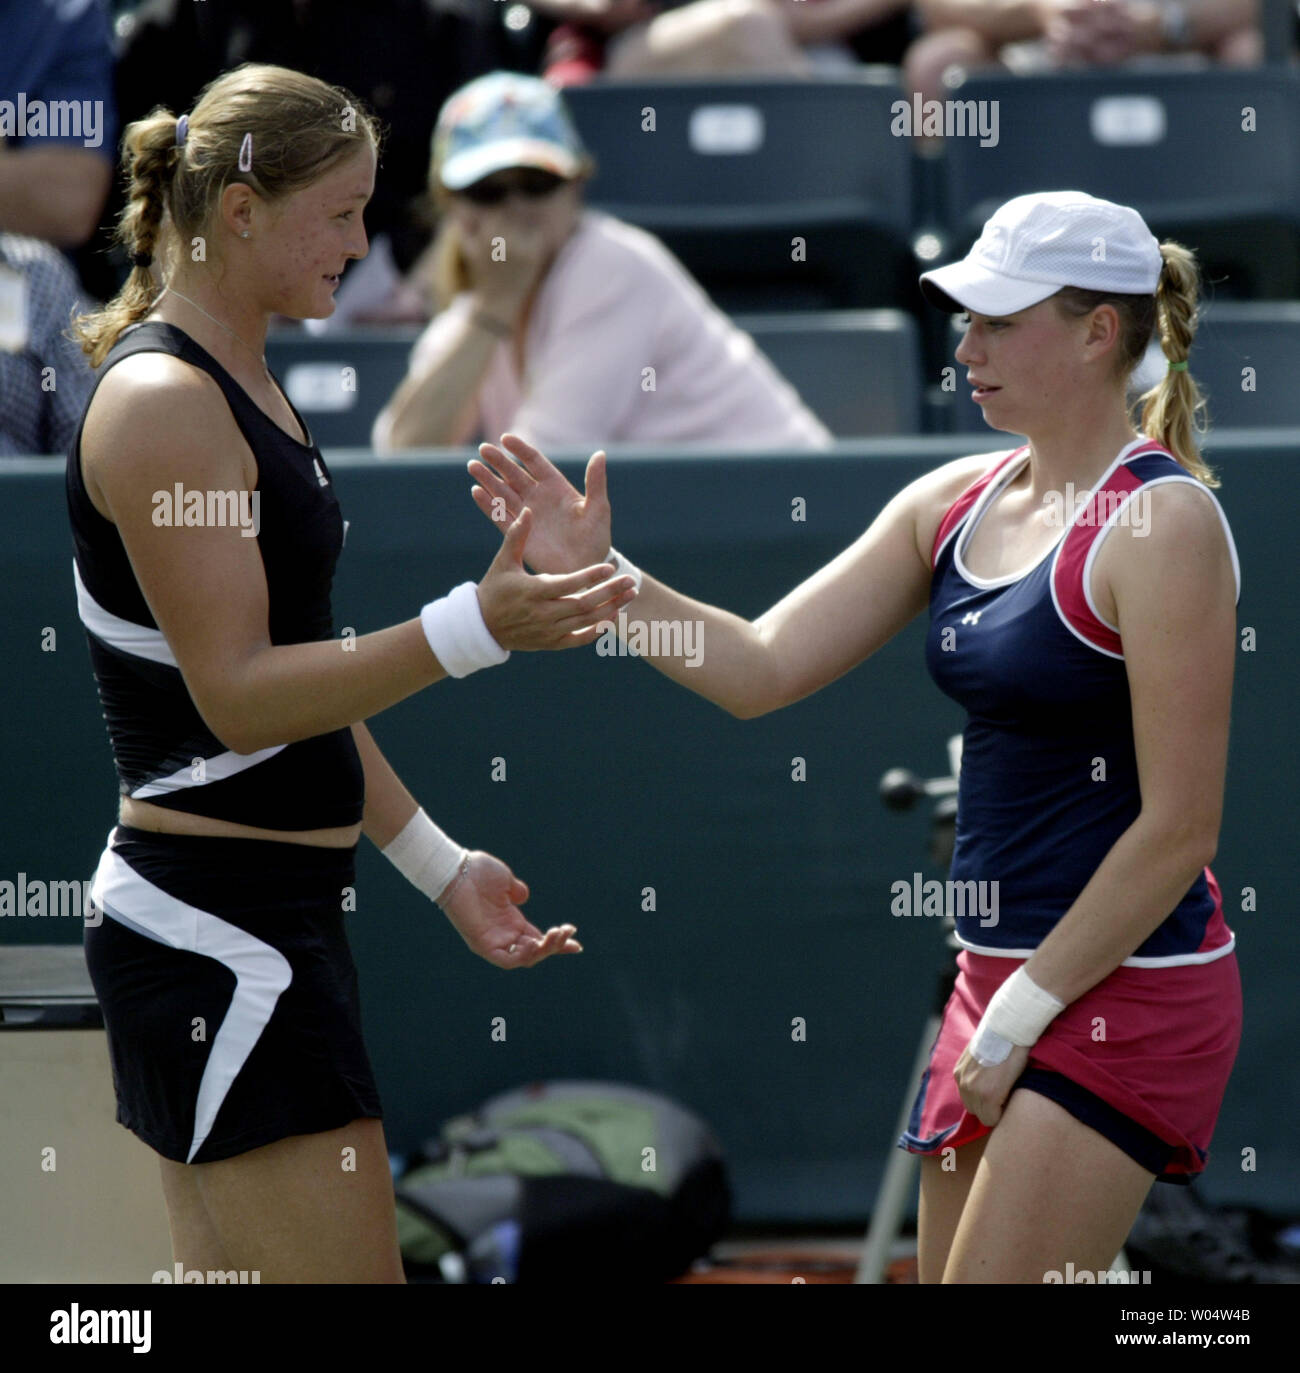 Dinara Safina of Russia (L) is congratulated by Vera Zvonareva of Russia after Zvonareva withdrew from their semi-final match because of an injury in the Family Circle Cup tennis tournament in Charleston, South Carolina on April 14, 2007.  (UPI Photo/Nell Redmond) Stock Photo